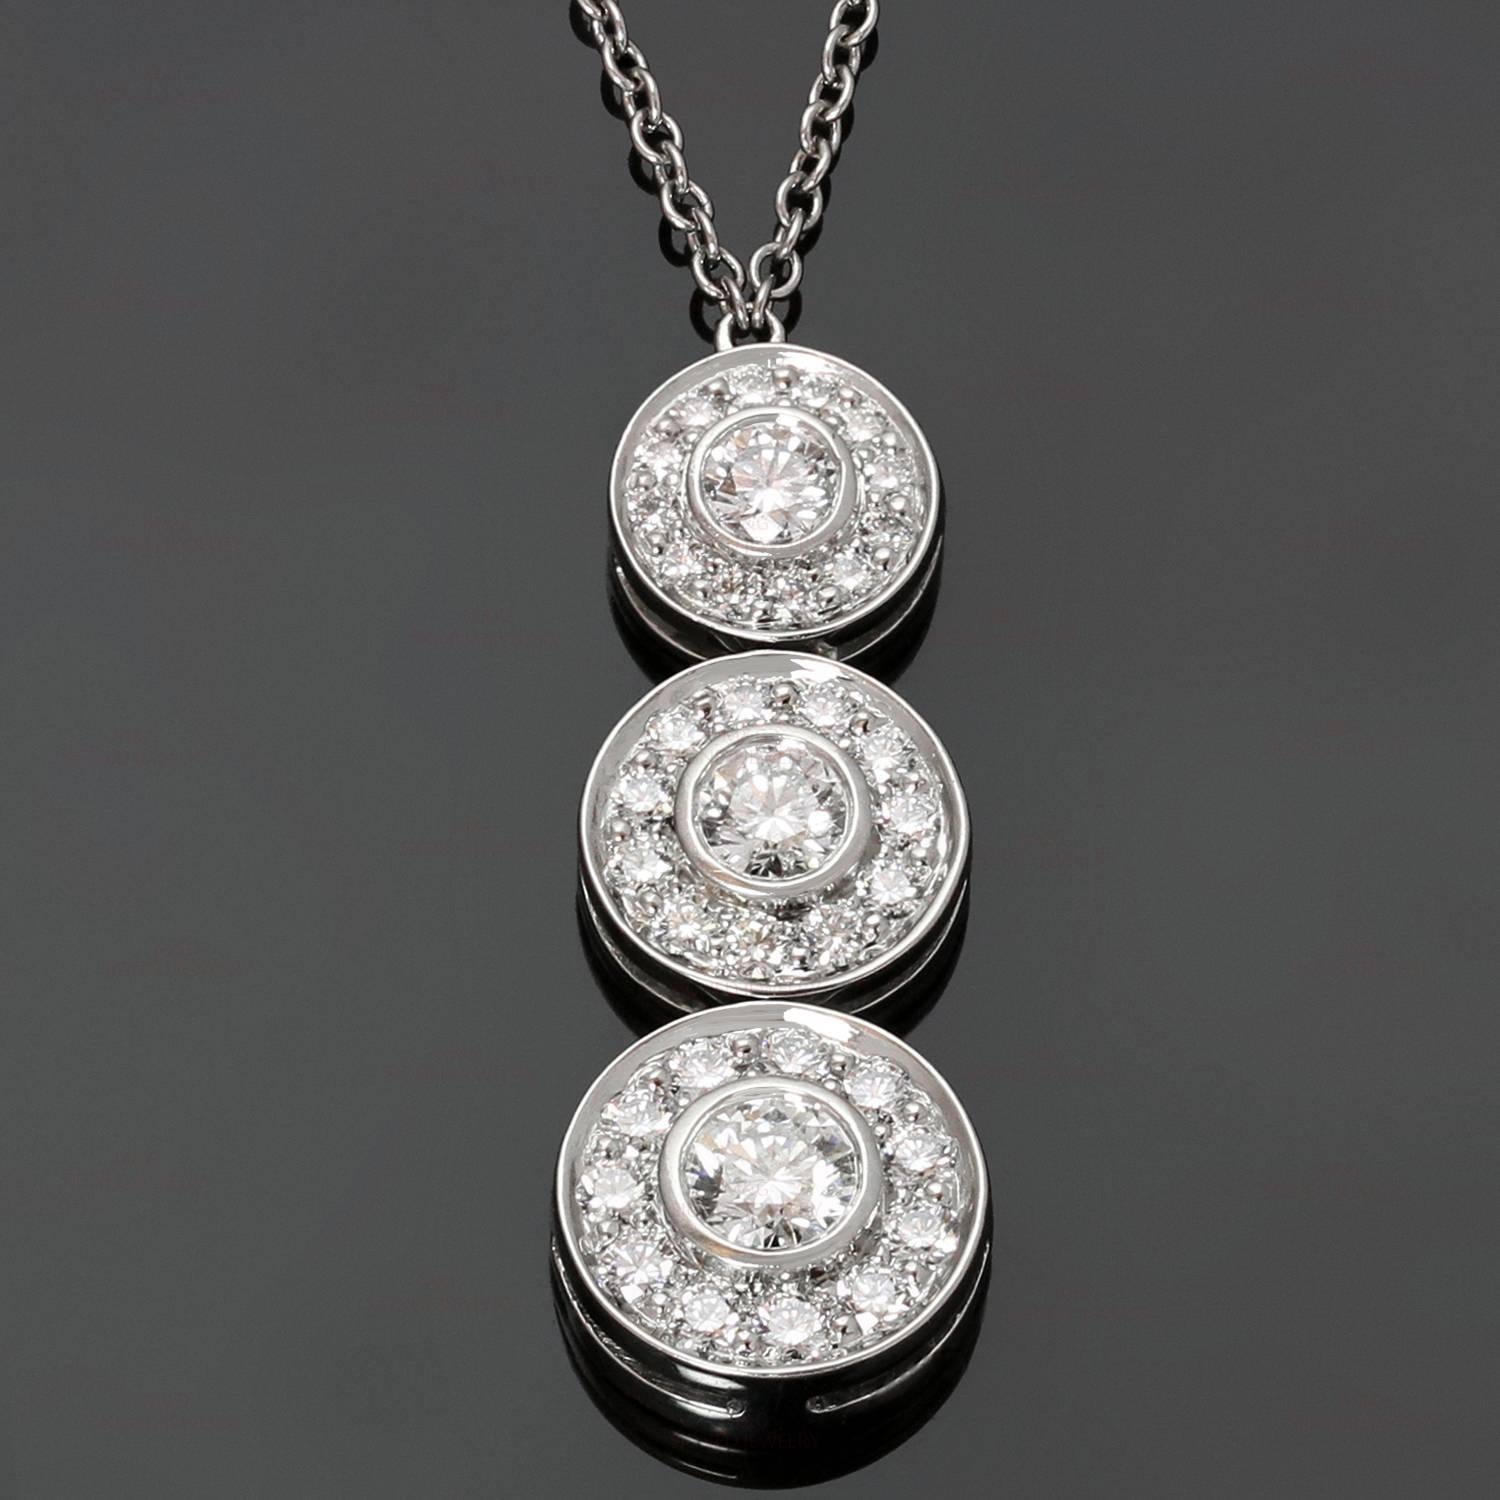 This classic Tiffany necklace from the timelessly elegant Circlet collection is made in platinum and features a 3-circle pendant set with brilliant-cut round diamonds of an estimated 0.55 carats. Made in United States circa 2000s. Measurements: